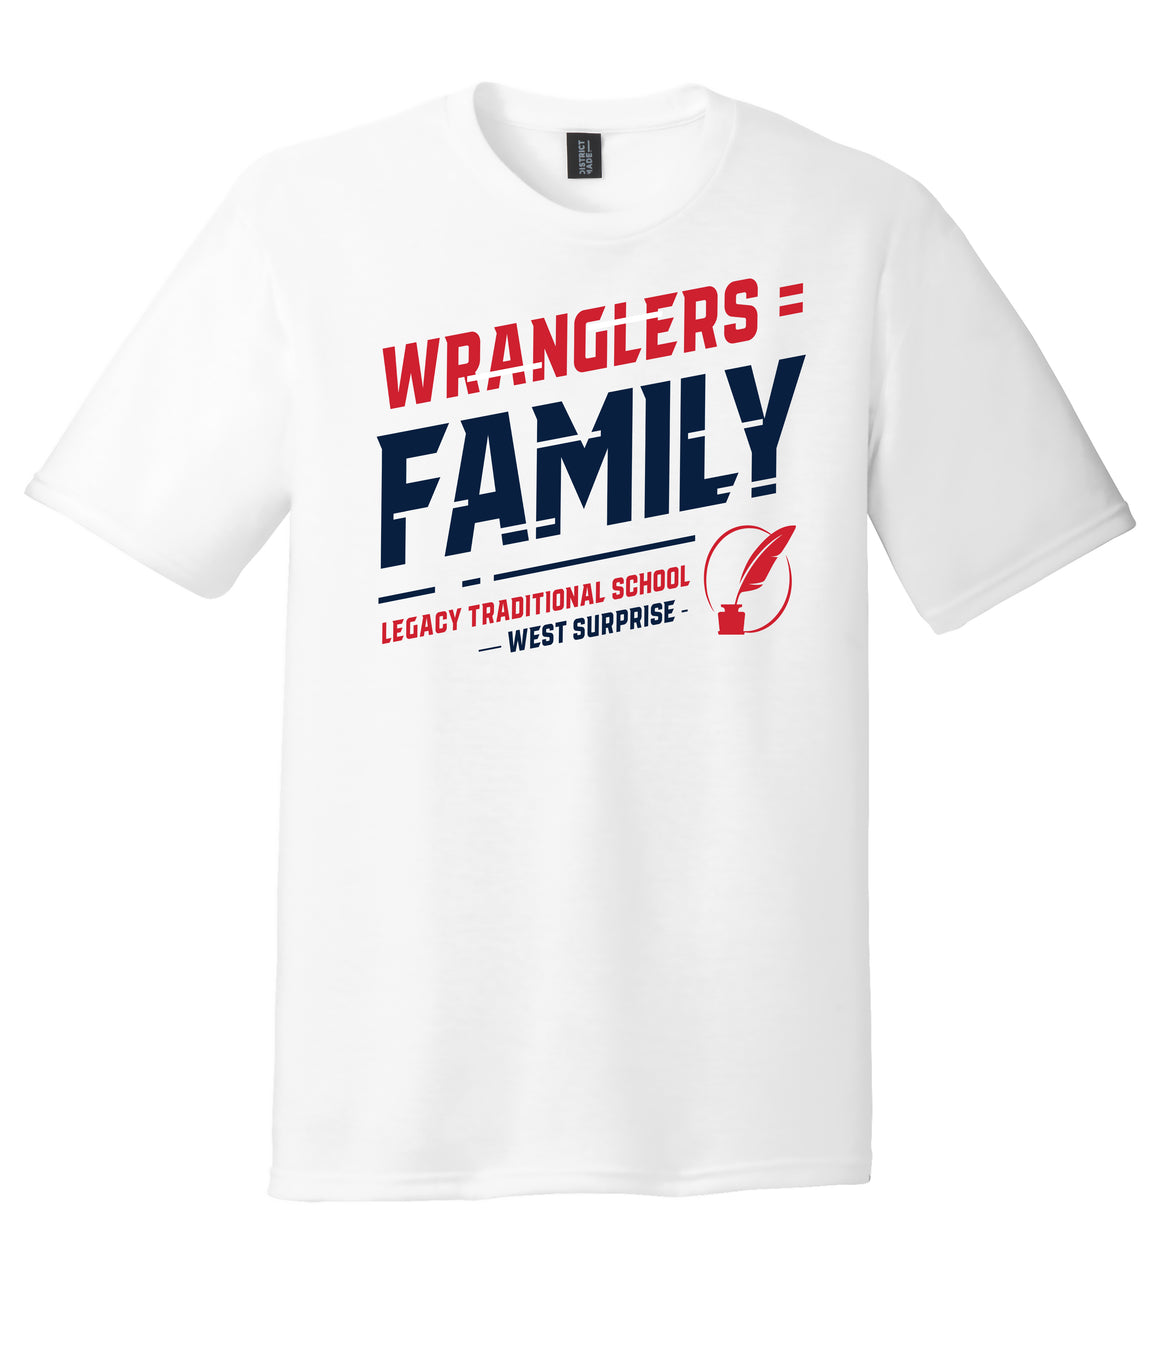 Legacy Traditional School West Surprise - White Spirit Day Shirt w/Family